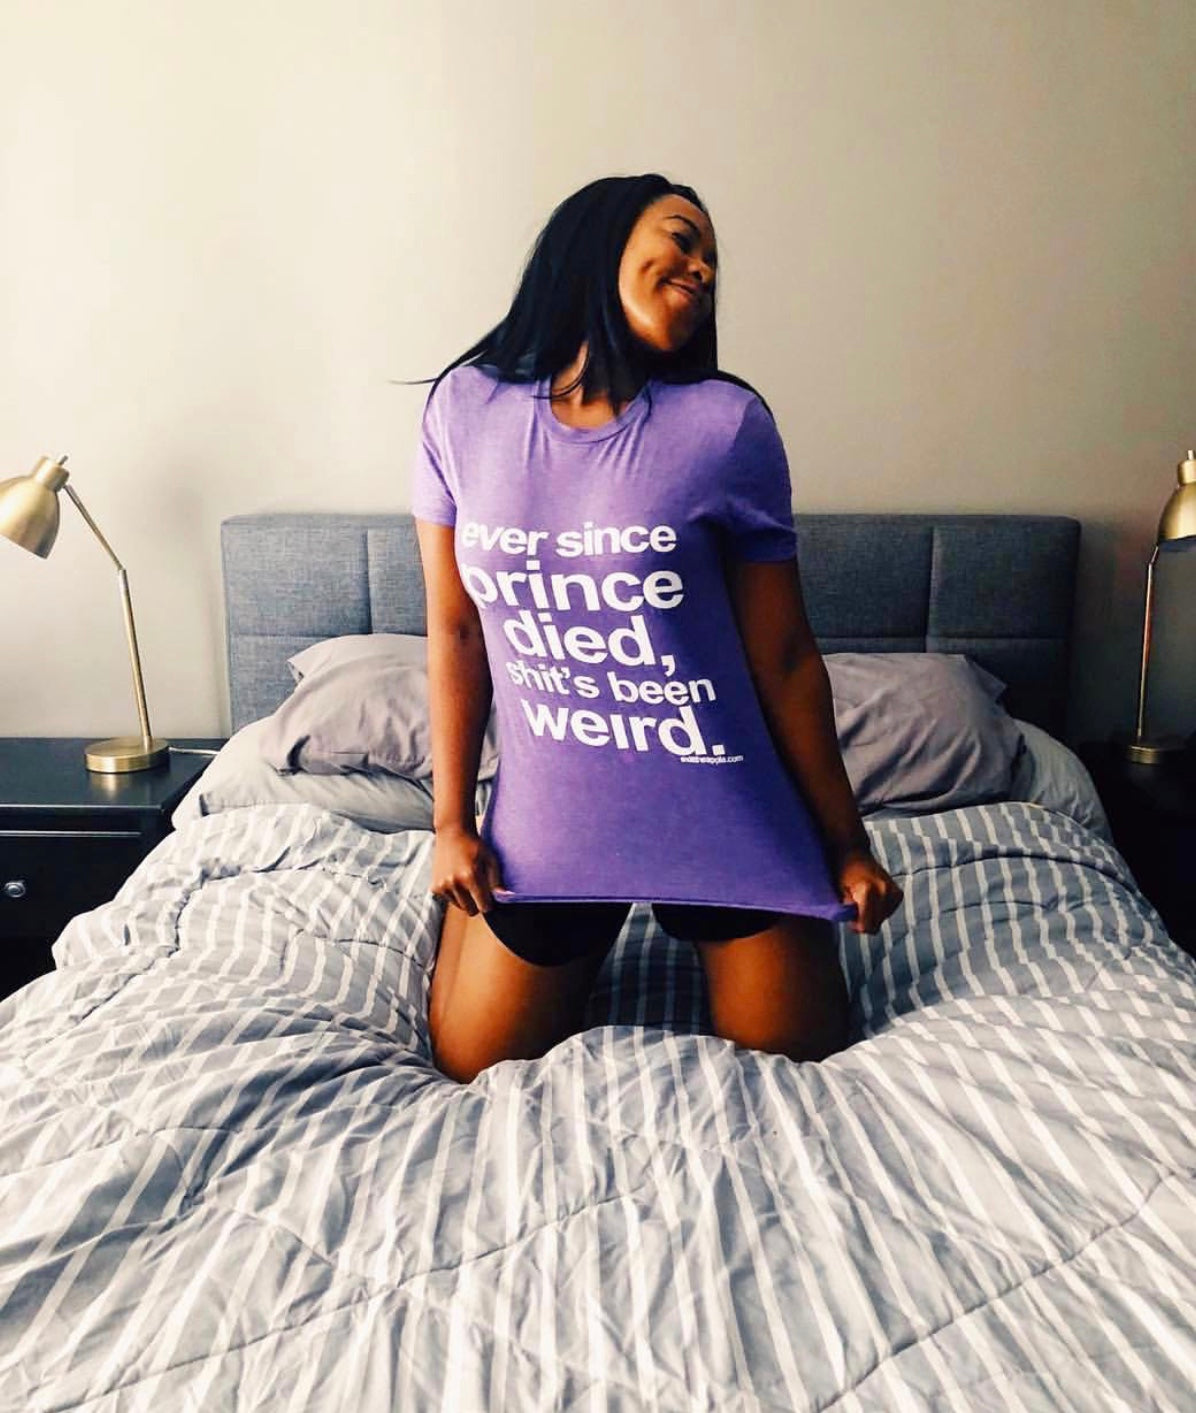 "Ever since Prince died sh*t's been weird" - the unisex tee